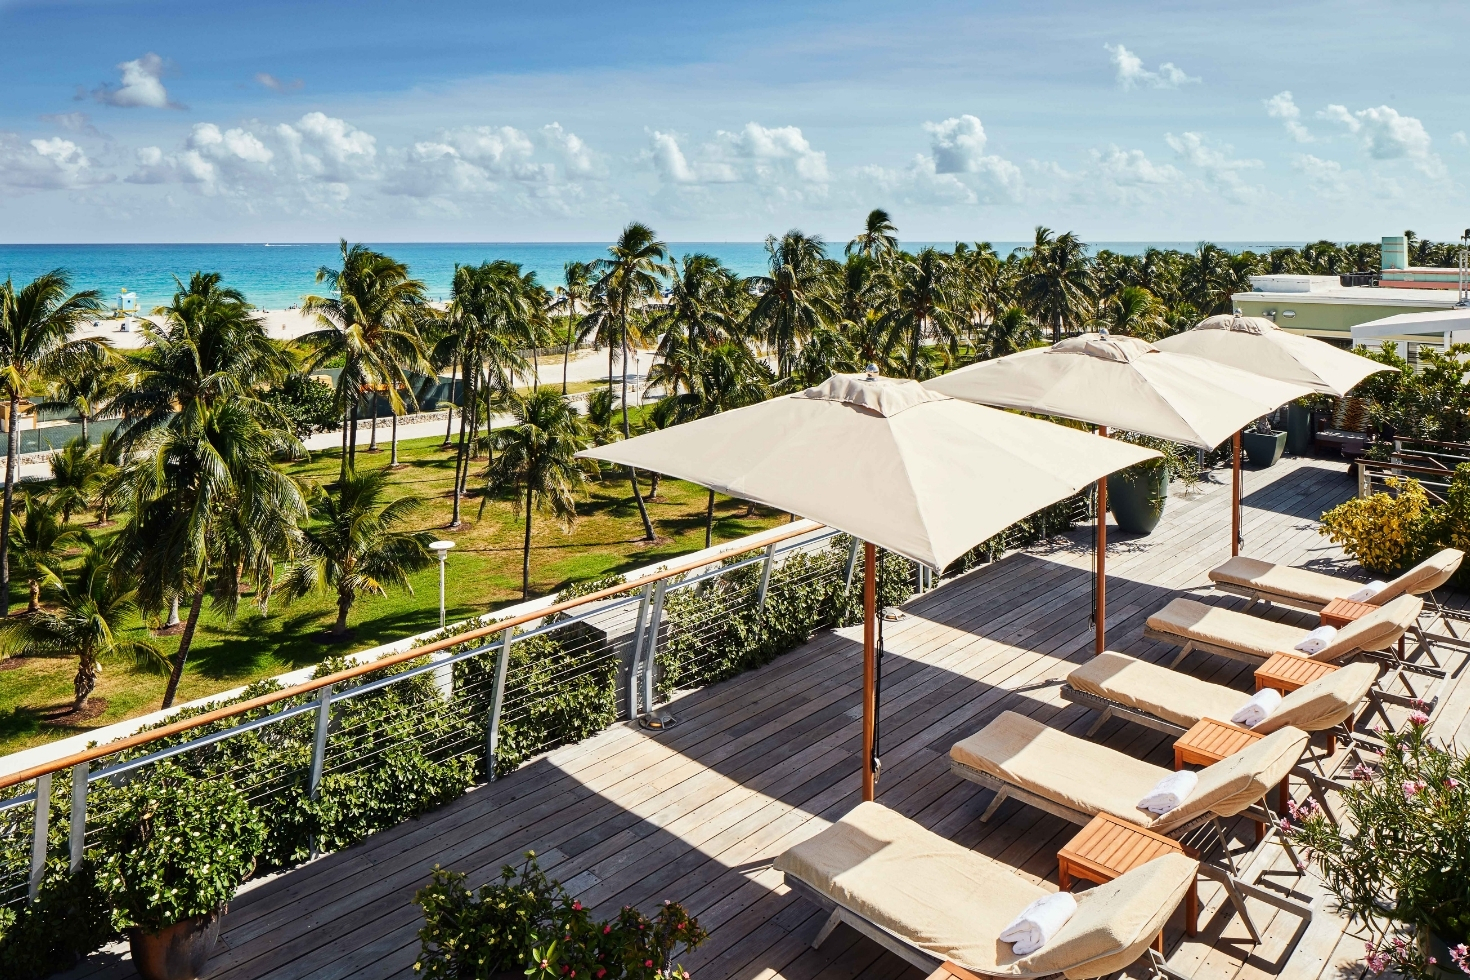 Lounge chairs and umbrellas overlooking the ocean